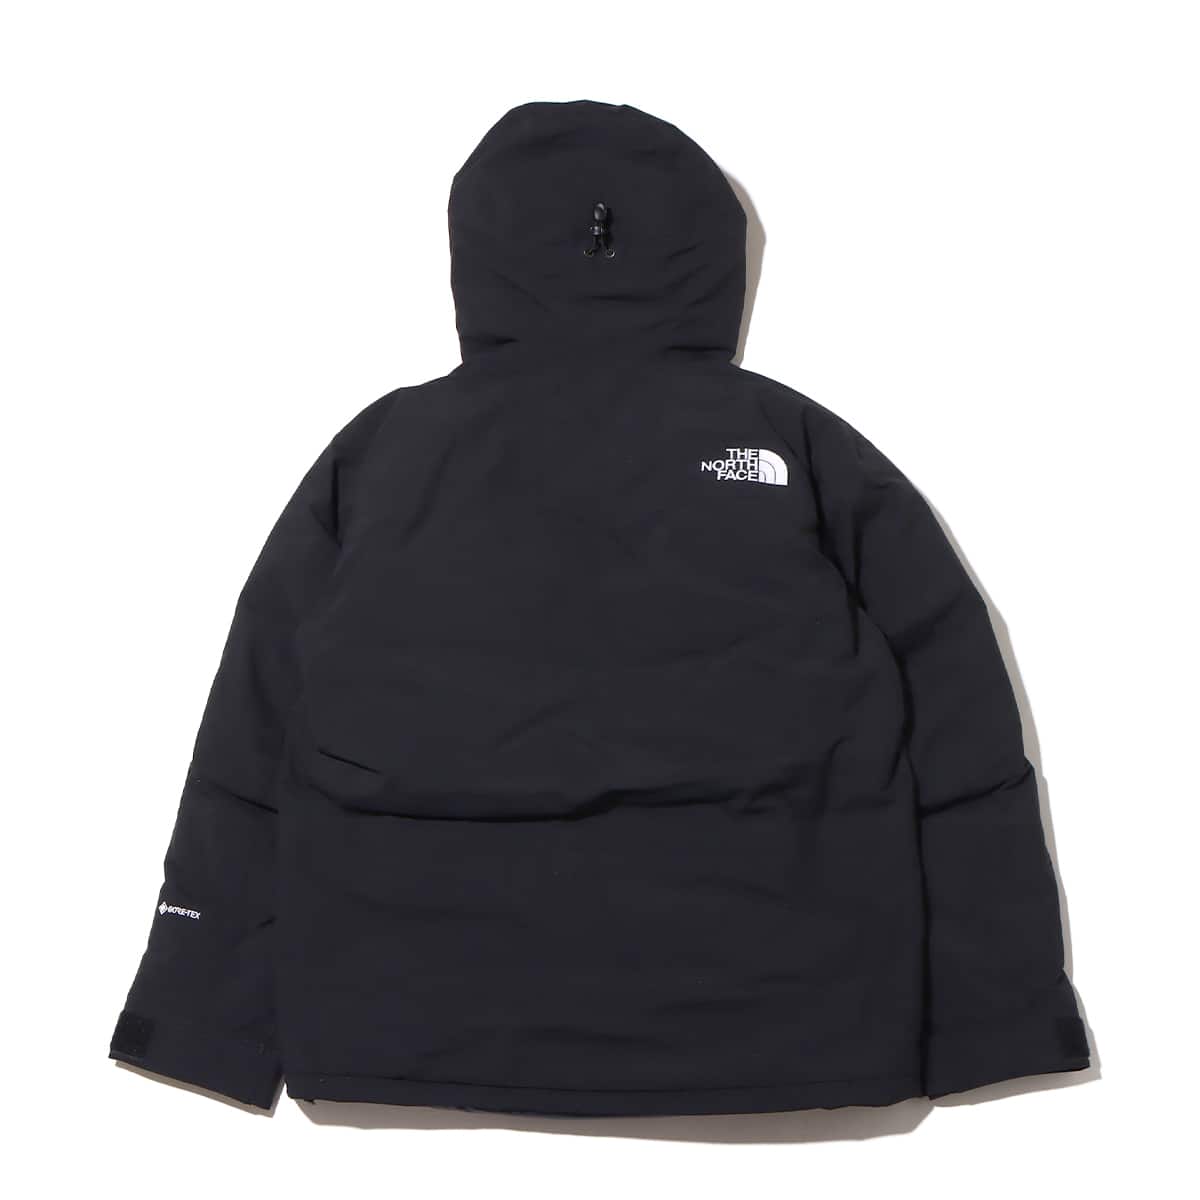 THE NORTH FACE MOUNTAIN DOWN JACKET ブラック 23FW-I